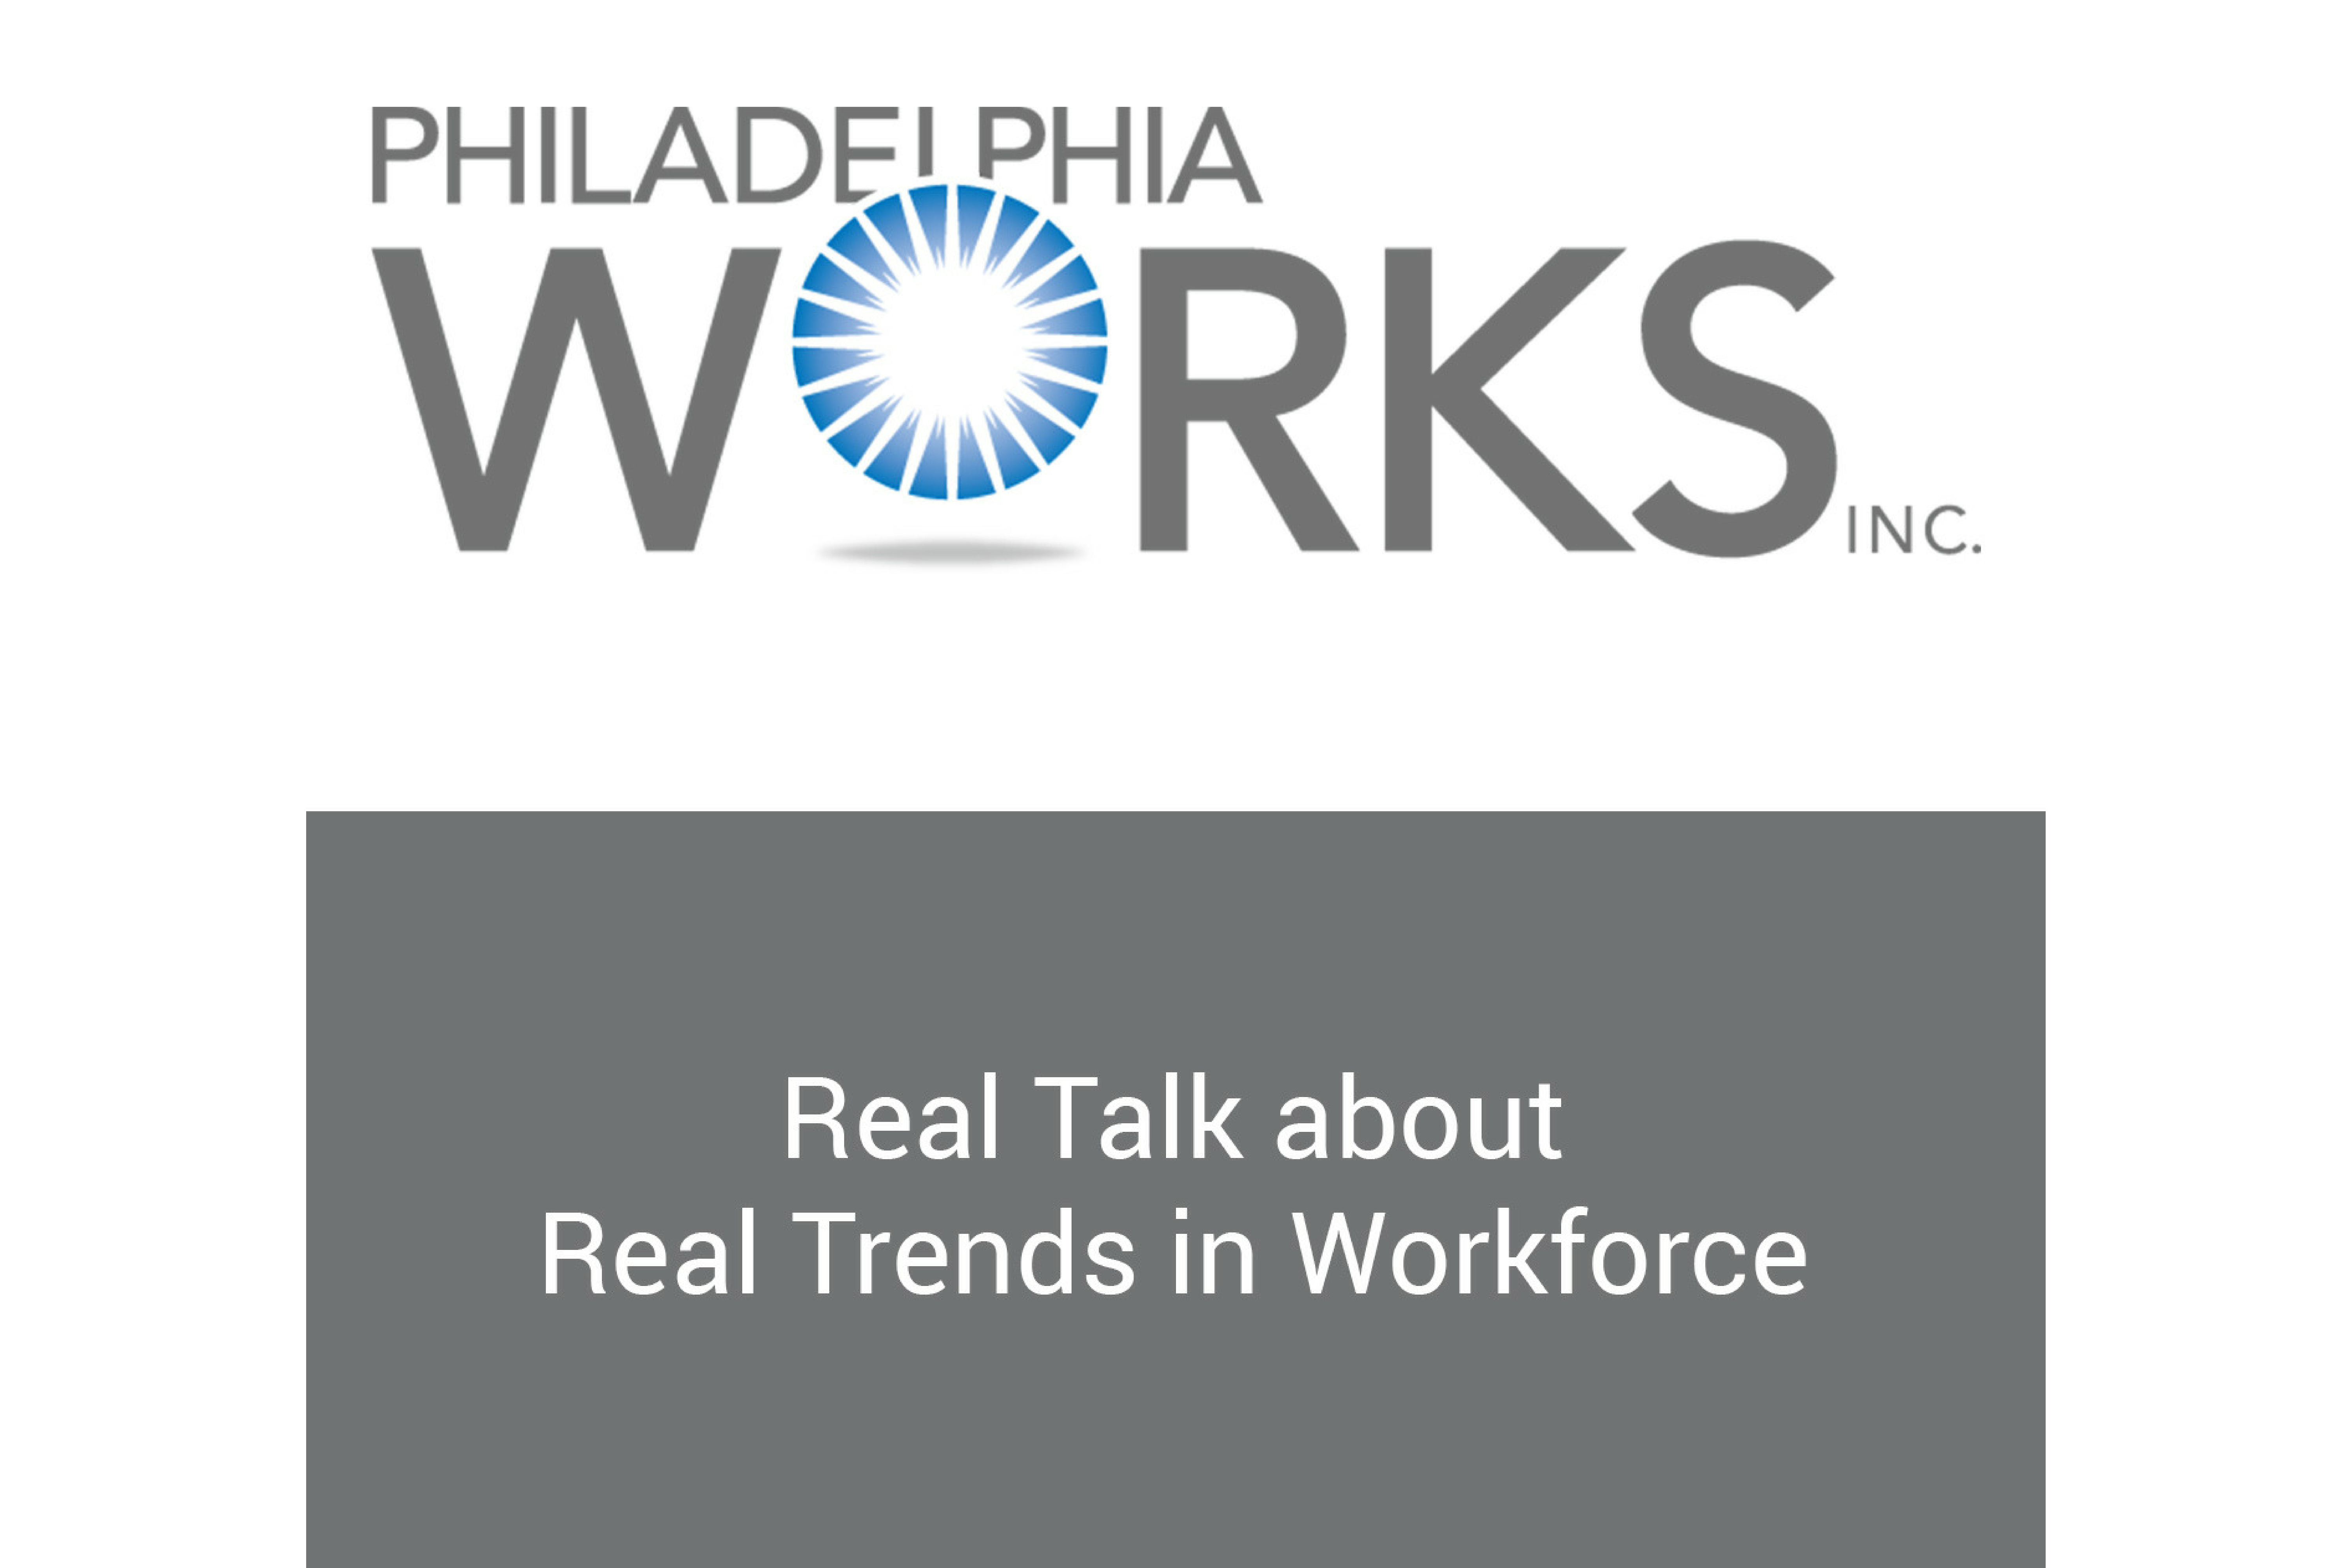 Real Talk about Real Trends in Workforce